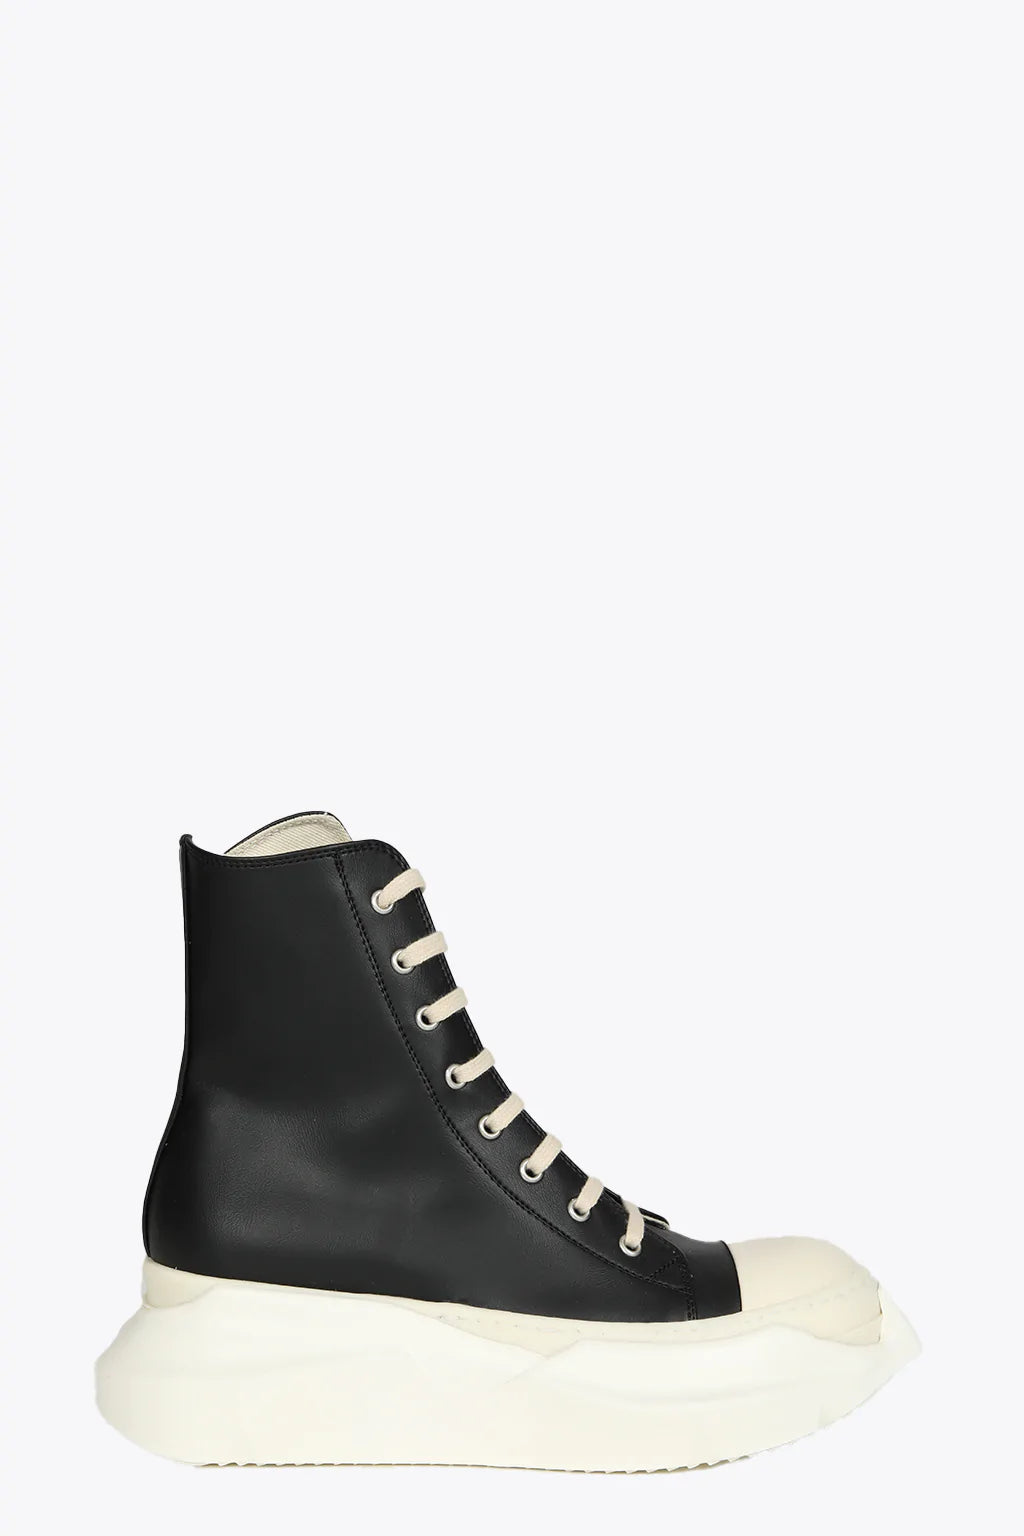 Rick Owens DRKSHDW High Top Abstract Sneakers